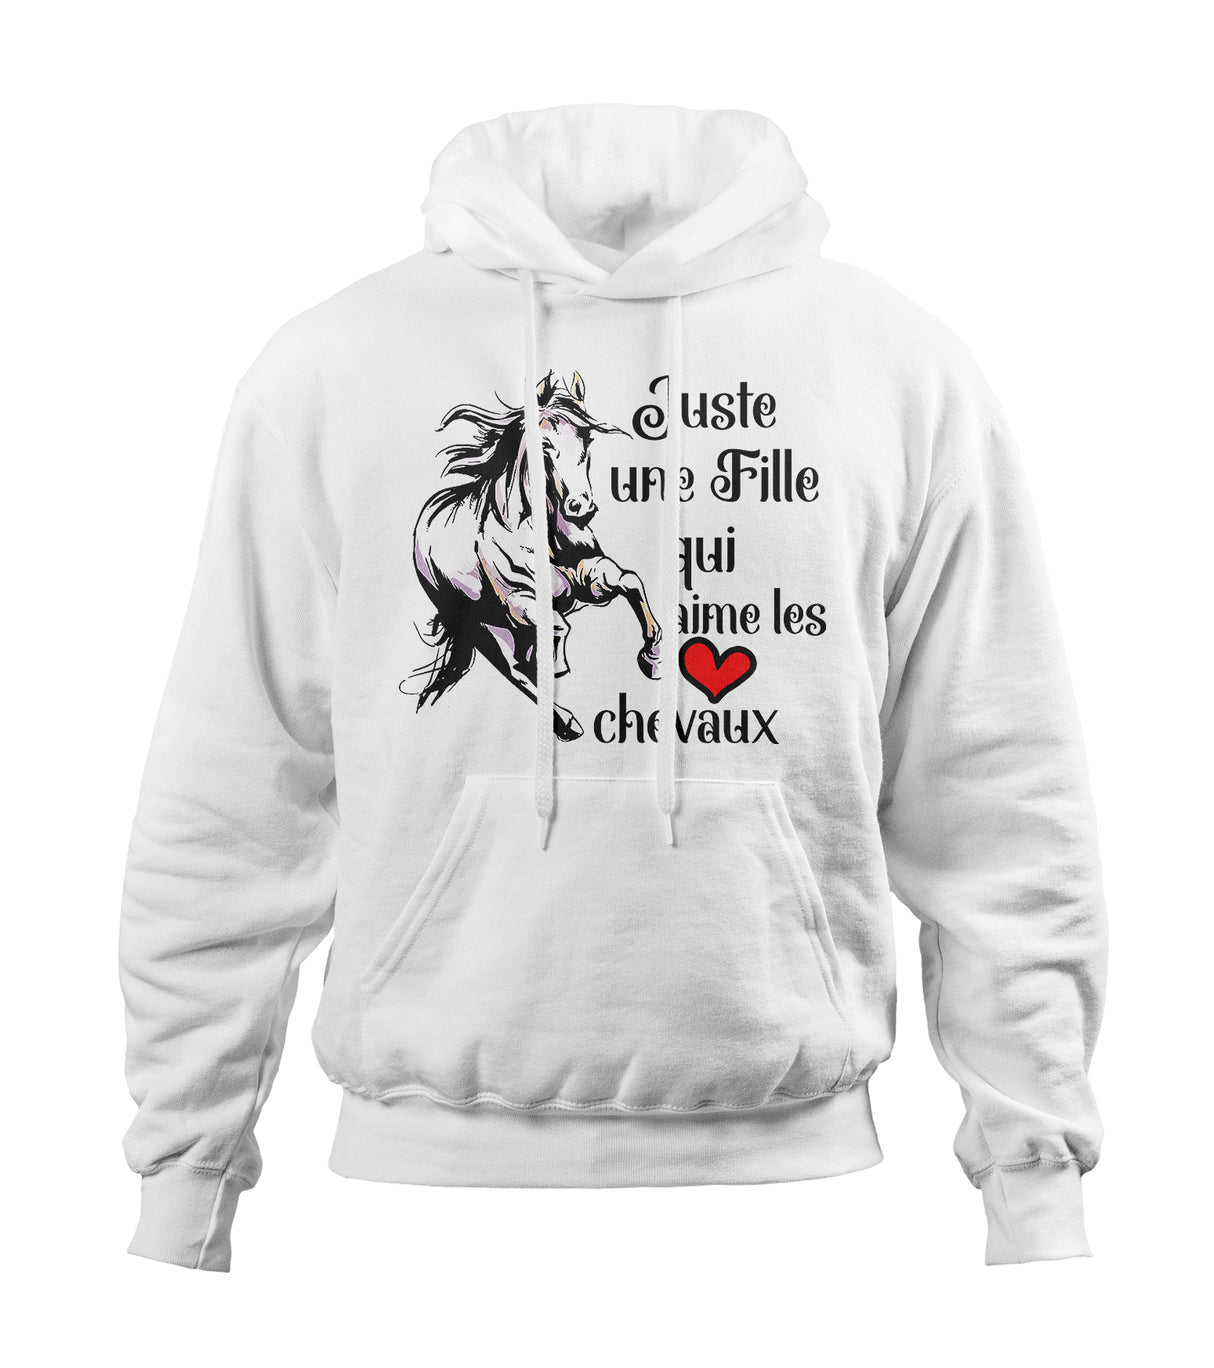 Original Horse Riding Gift Girl's T-Shirt - Just A Girl Who Loves Horses - Horse Girl Gift - CTS09042201